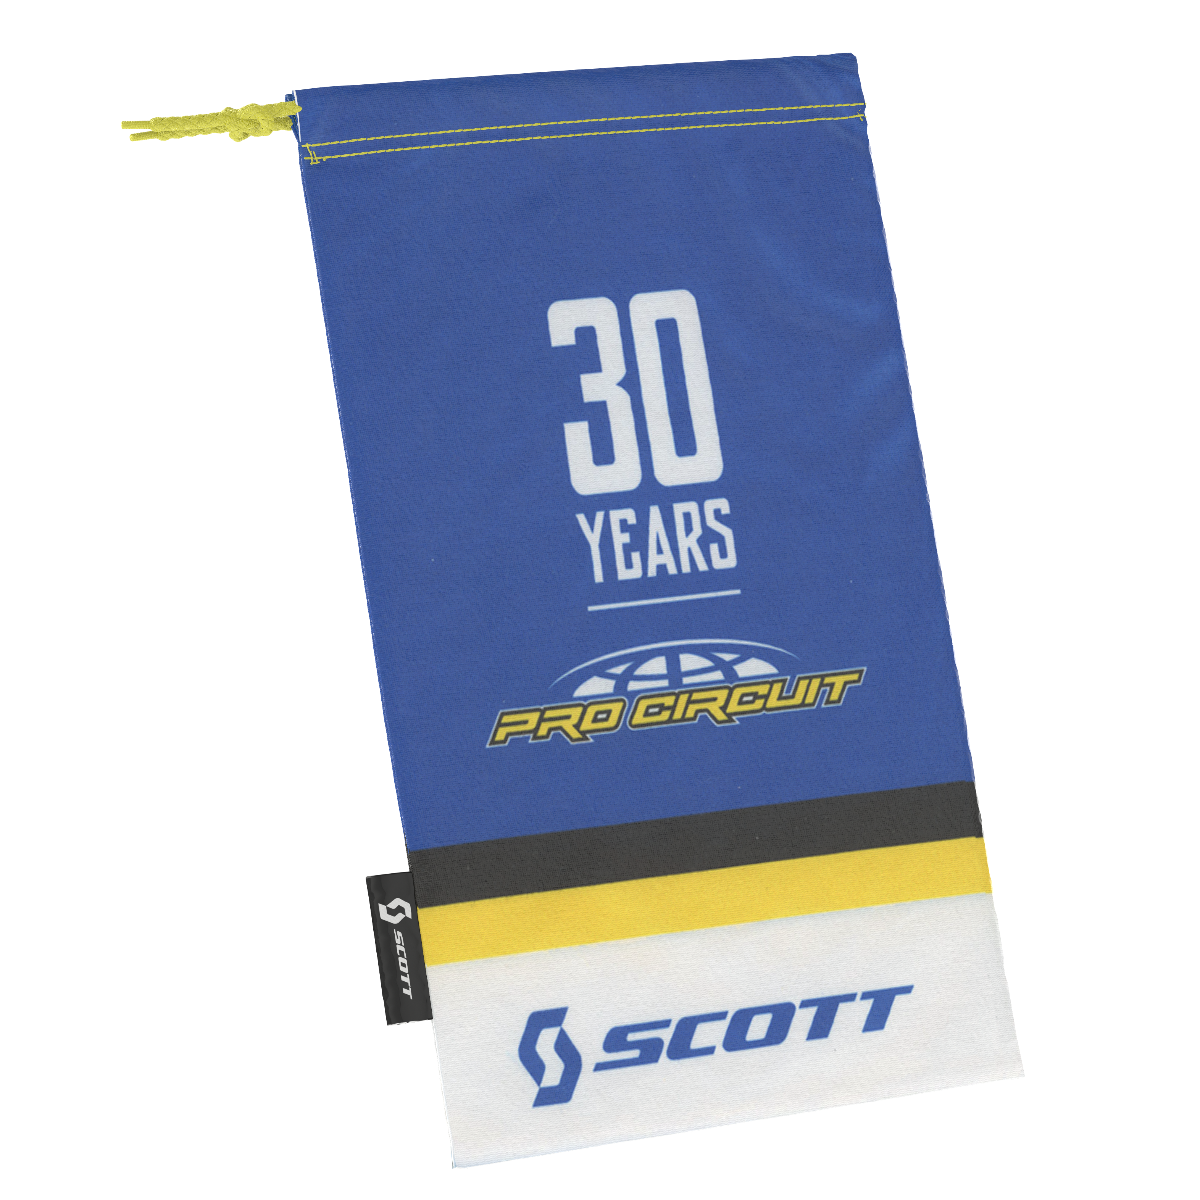 Scott Prospect Pro Circuit 30 Years Limited Edition Goggle Blue/Yellow/Electric Blue Chrome Lens